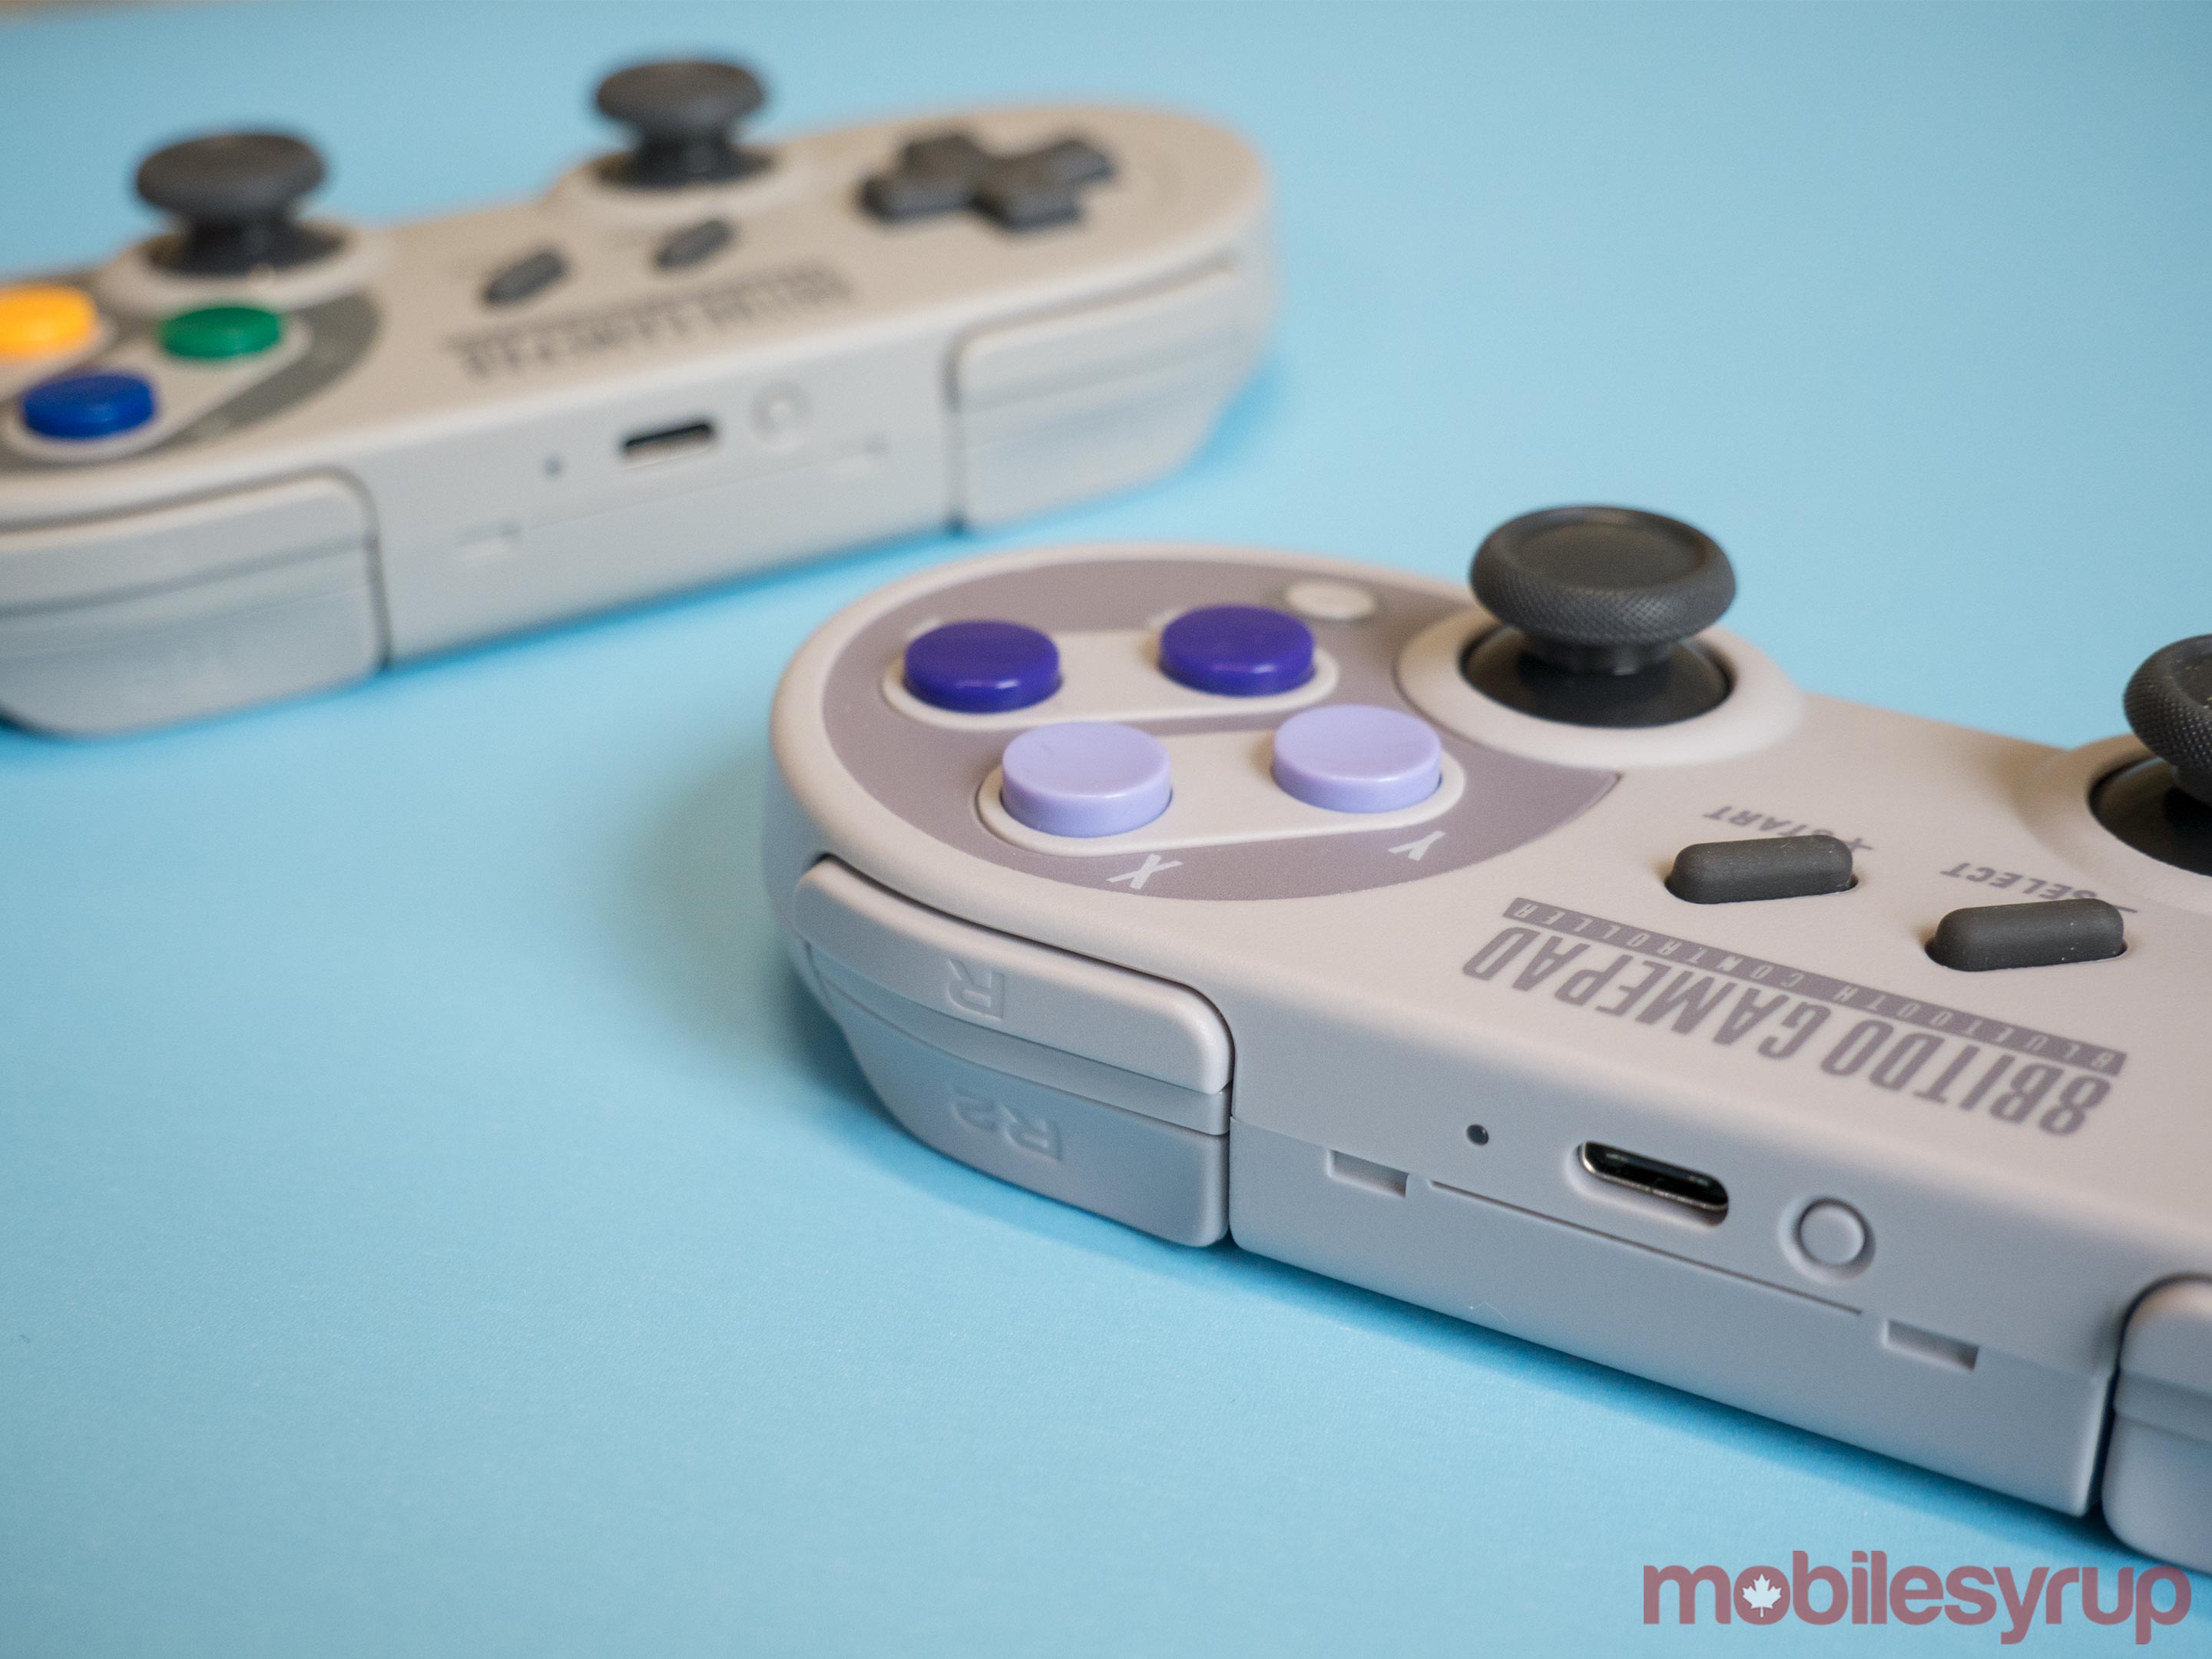 8bitdo's SN30 and SF30 Pro controller from a side view